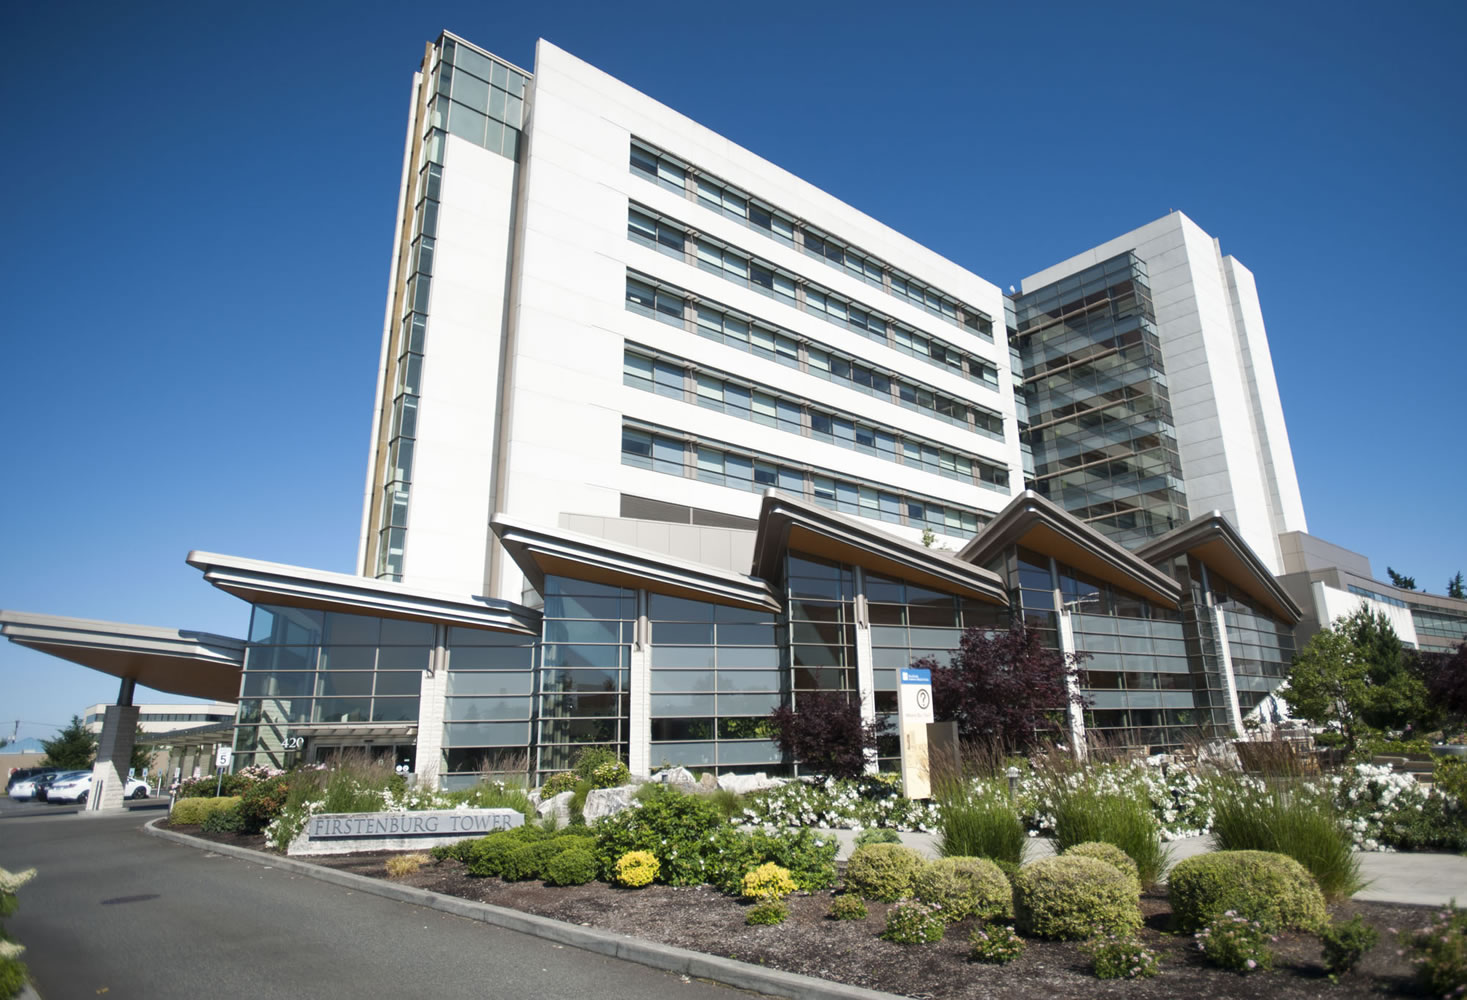 A woman has filed a lawsuit against her former supervisor and PeaceHealth Southwest Medical Center in Vancouver, alleging, among other things, wrongful termination, sexual harassment and disability discrimination.